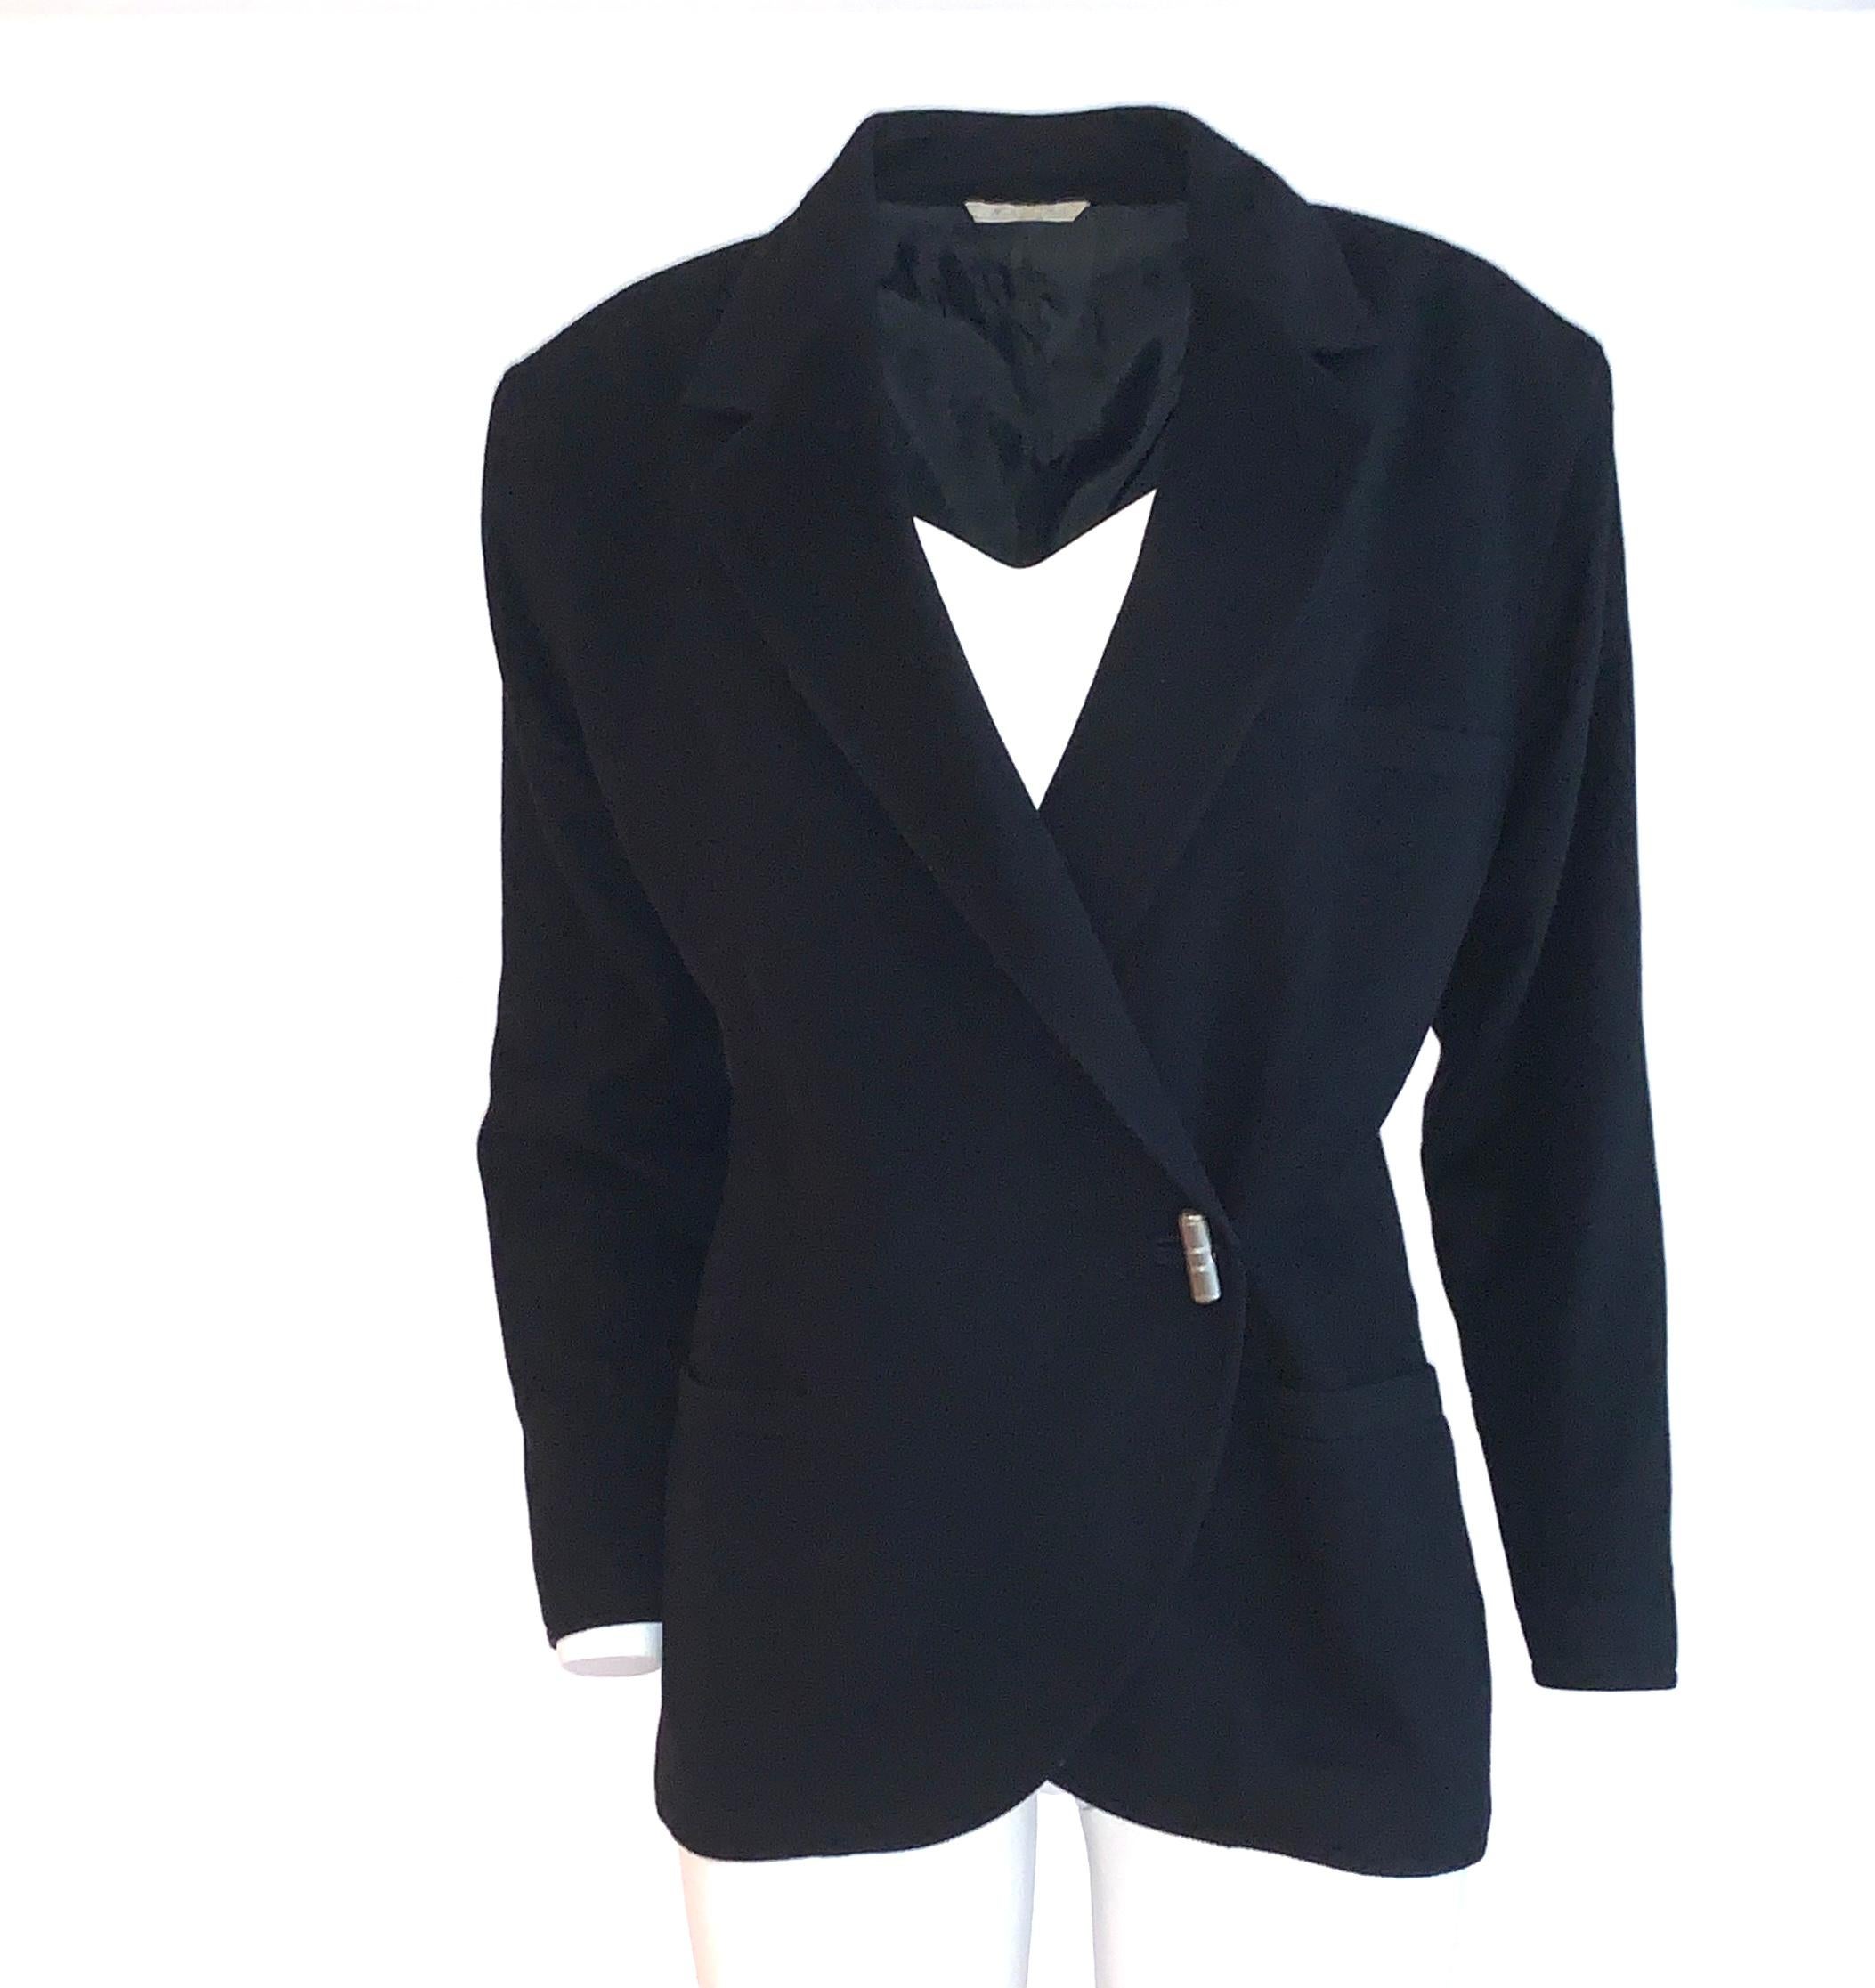 Vintage Gianni Versace blazer in a soft fleecy black wool with silver buttons that resemble toggles at front and cuff. (They just function like buttons.) Slightly boxy fit with light padding at shoulders. Long sleeve, jacket fastens with an interior